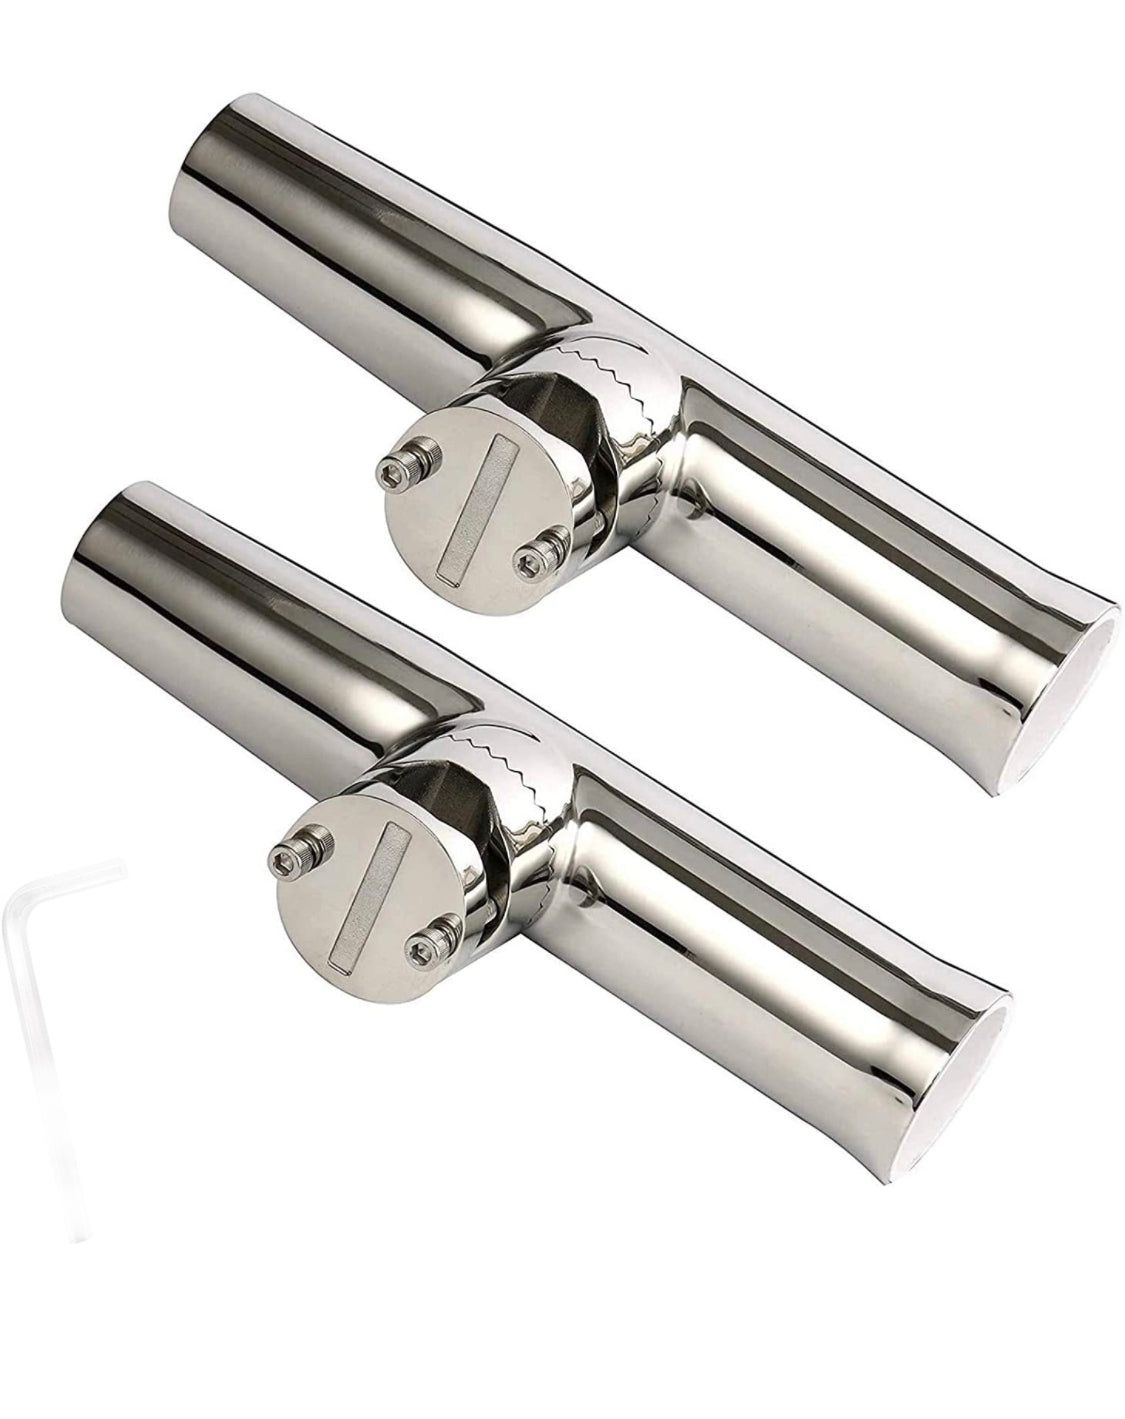 Set of Stainless-Steel Clamp-on Fishing Rod Holders for boat Rail 1-1/4 inches-2 inches Dia. Large